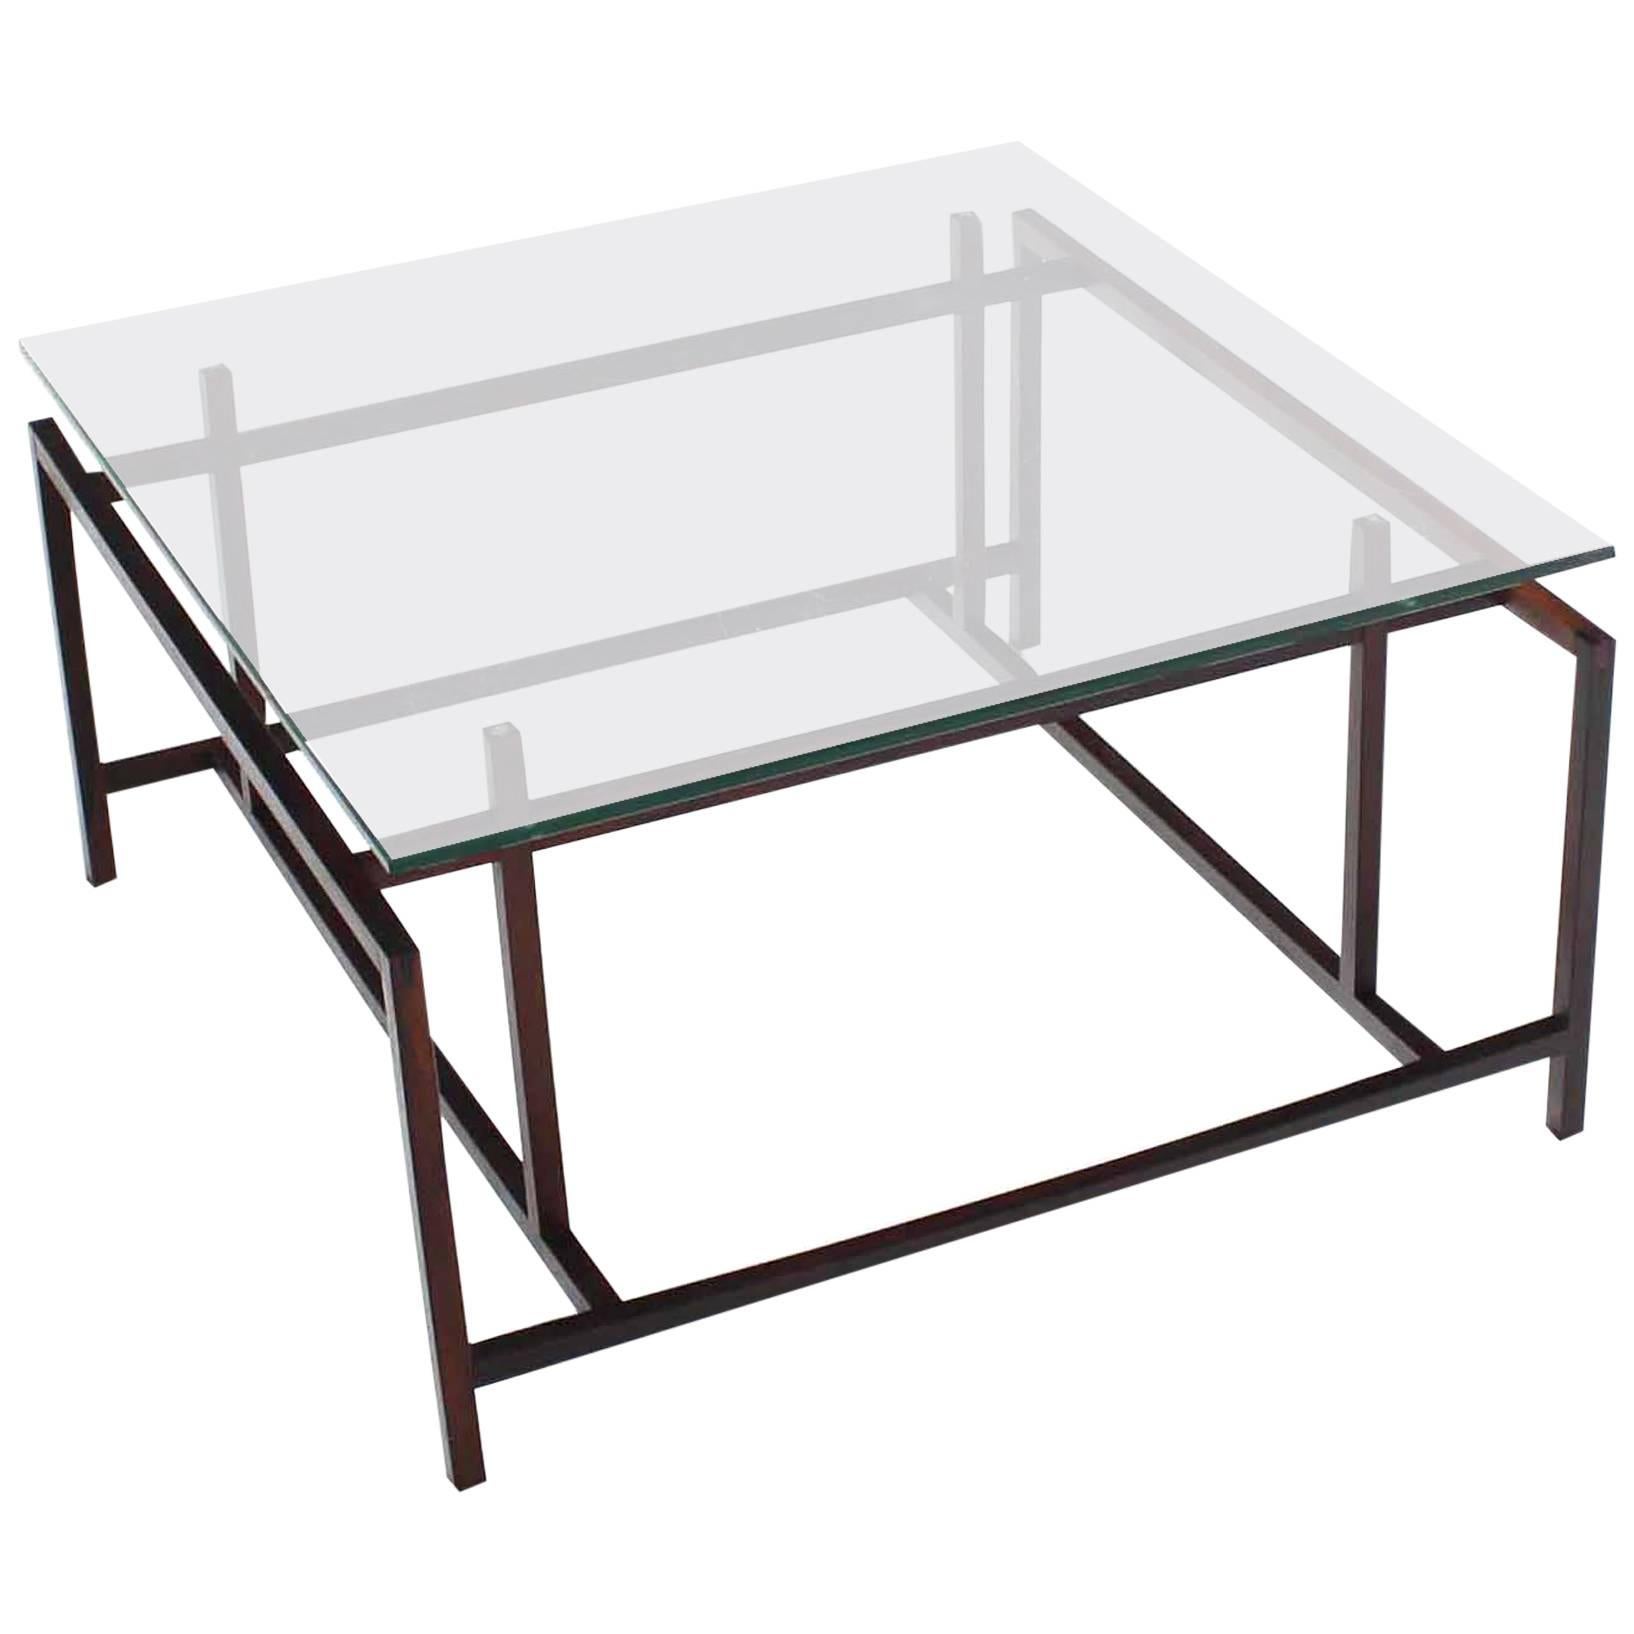 Square Rosewood Geometrical Base Glass Top Mid-Century Modern Coffee Table For Sale